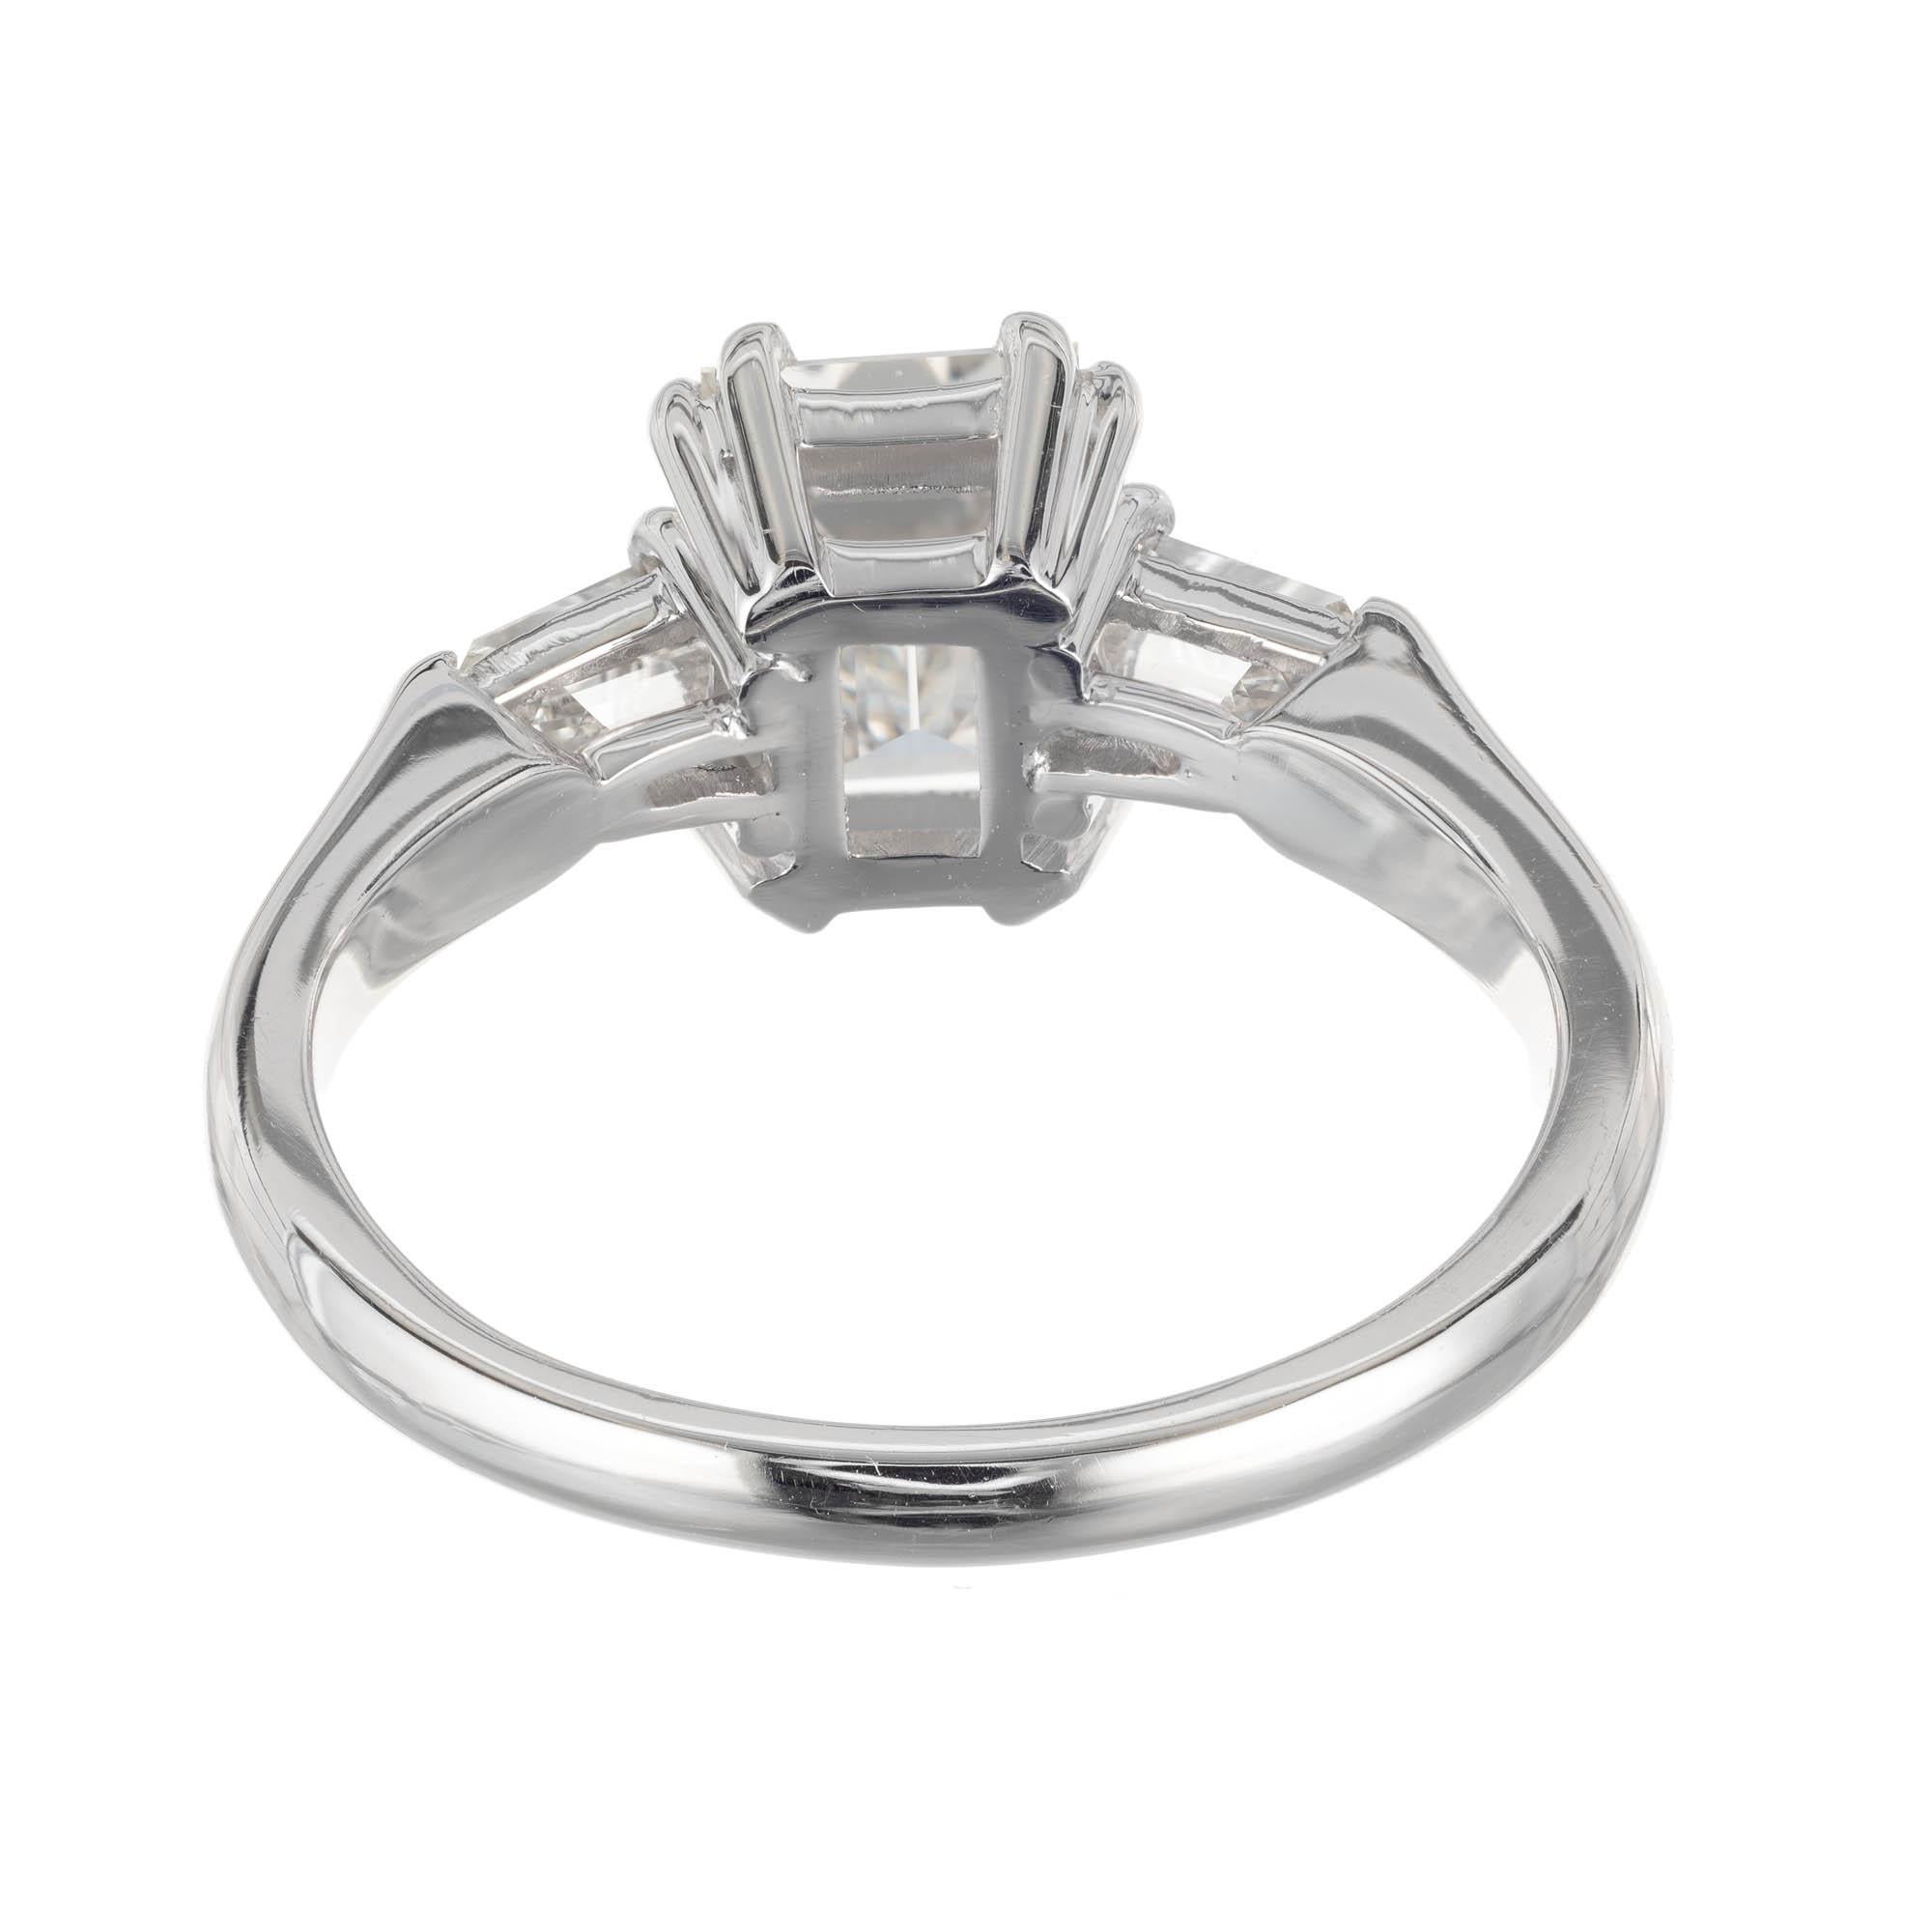 Peter Suchy 1.88 Carat Diamond Platinum Three-Stone Engagement Ring In New Condition For Sale In Stamford, CT